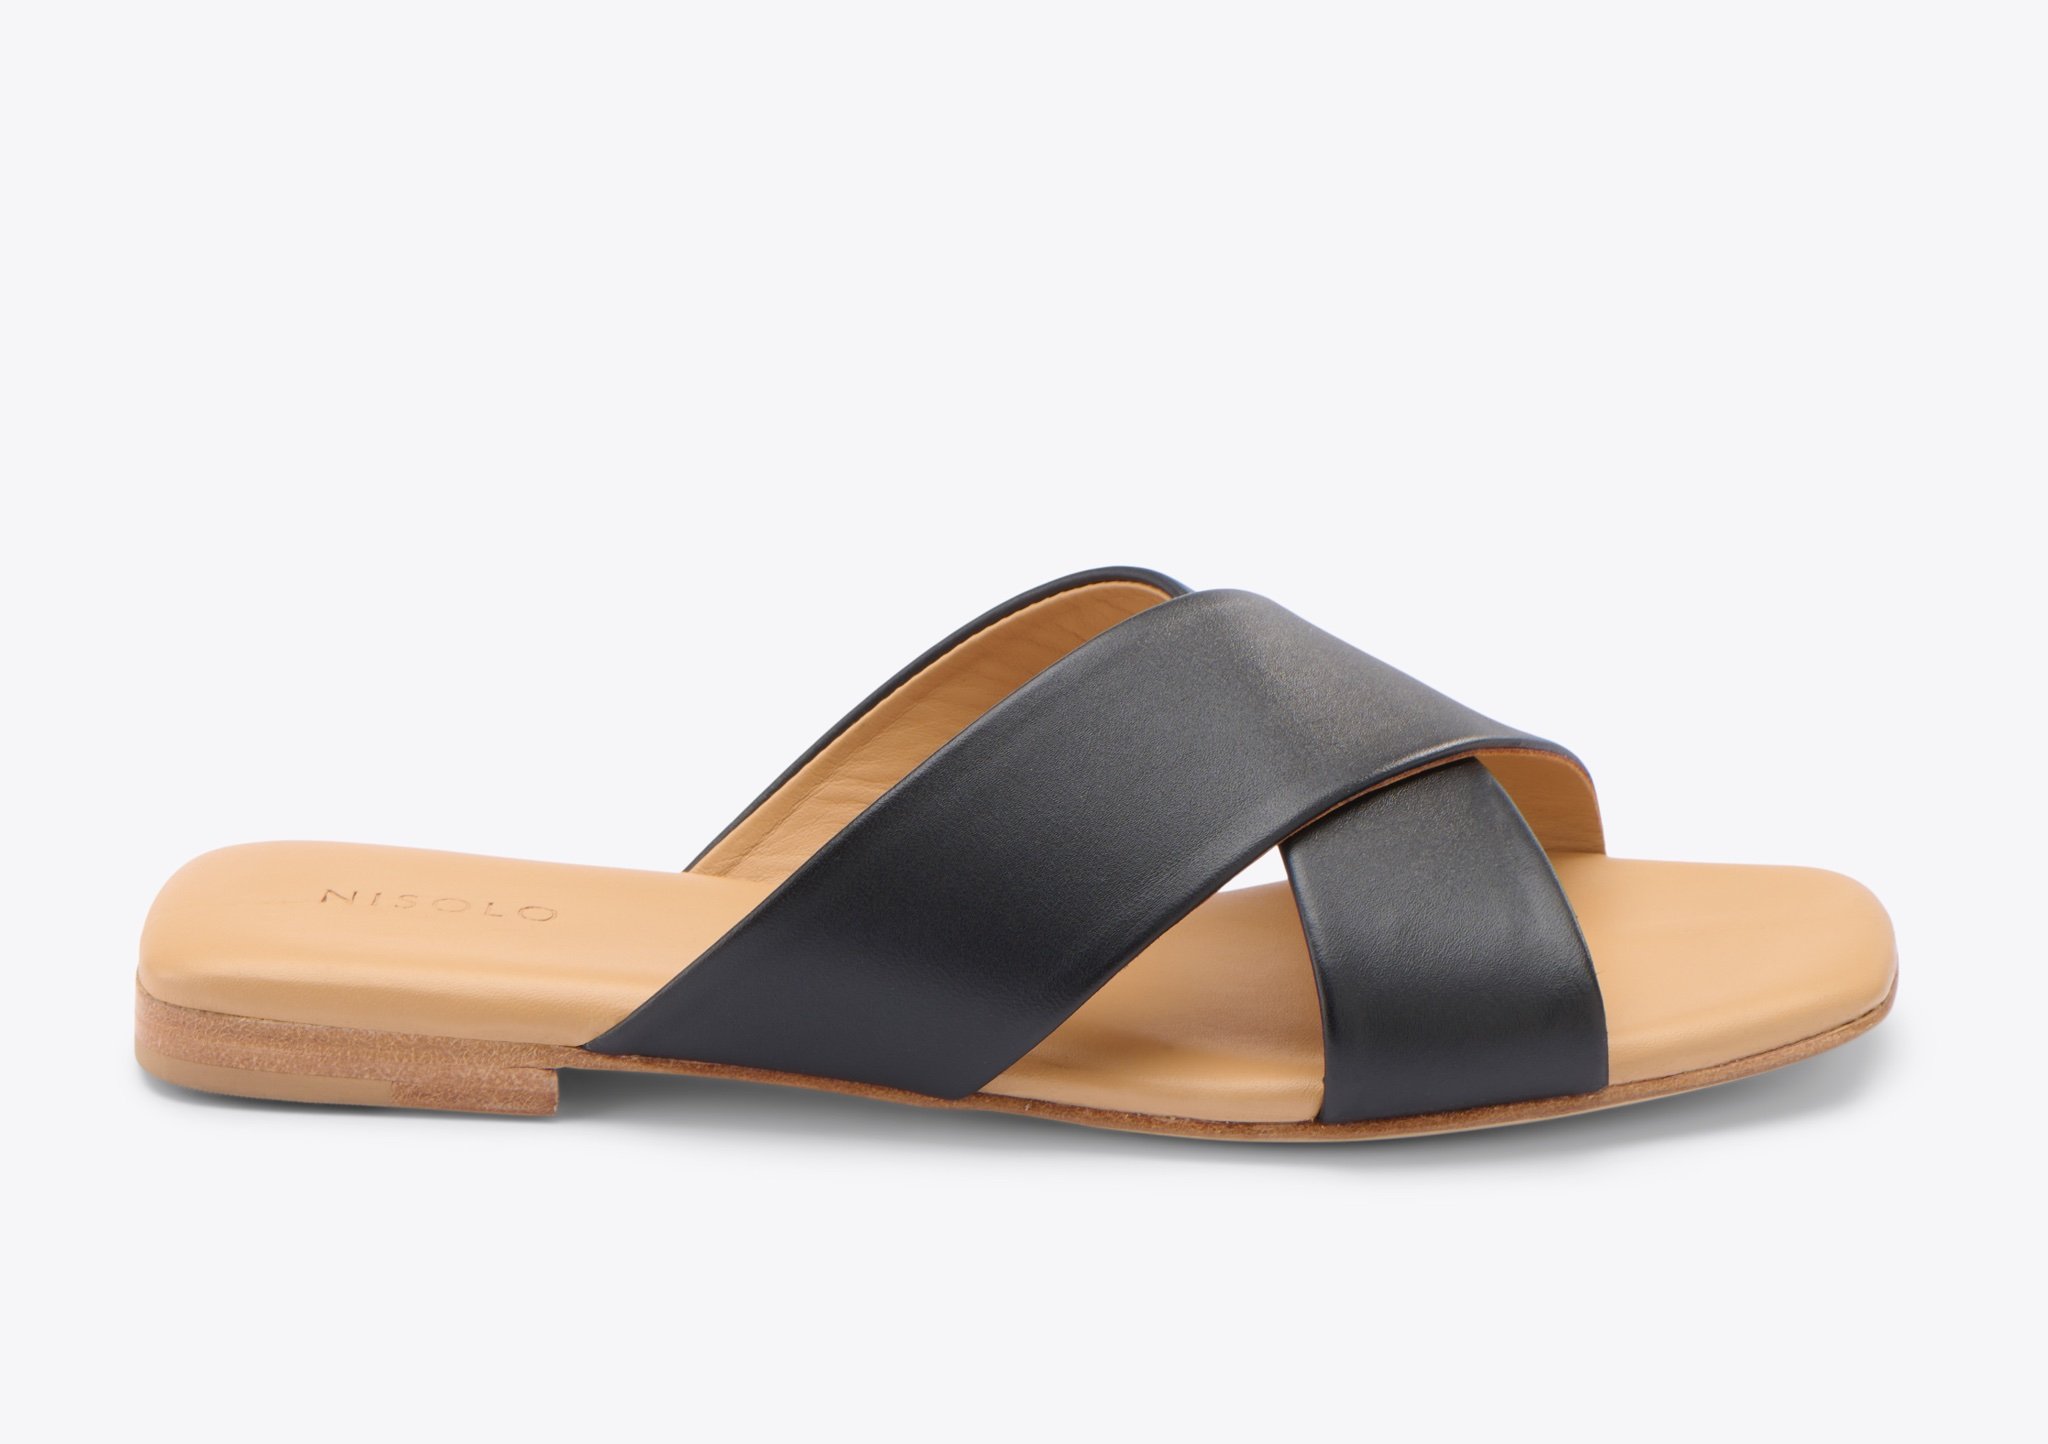 Nisolo Catalina Slide Sandal Black - Every Nisolo product is built on the foundation of comfort, function, and design. 